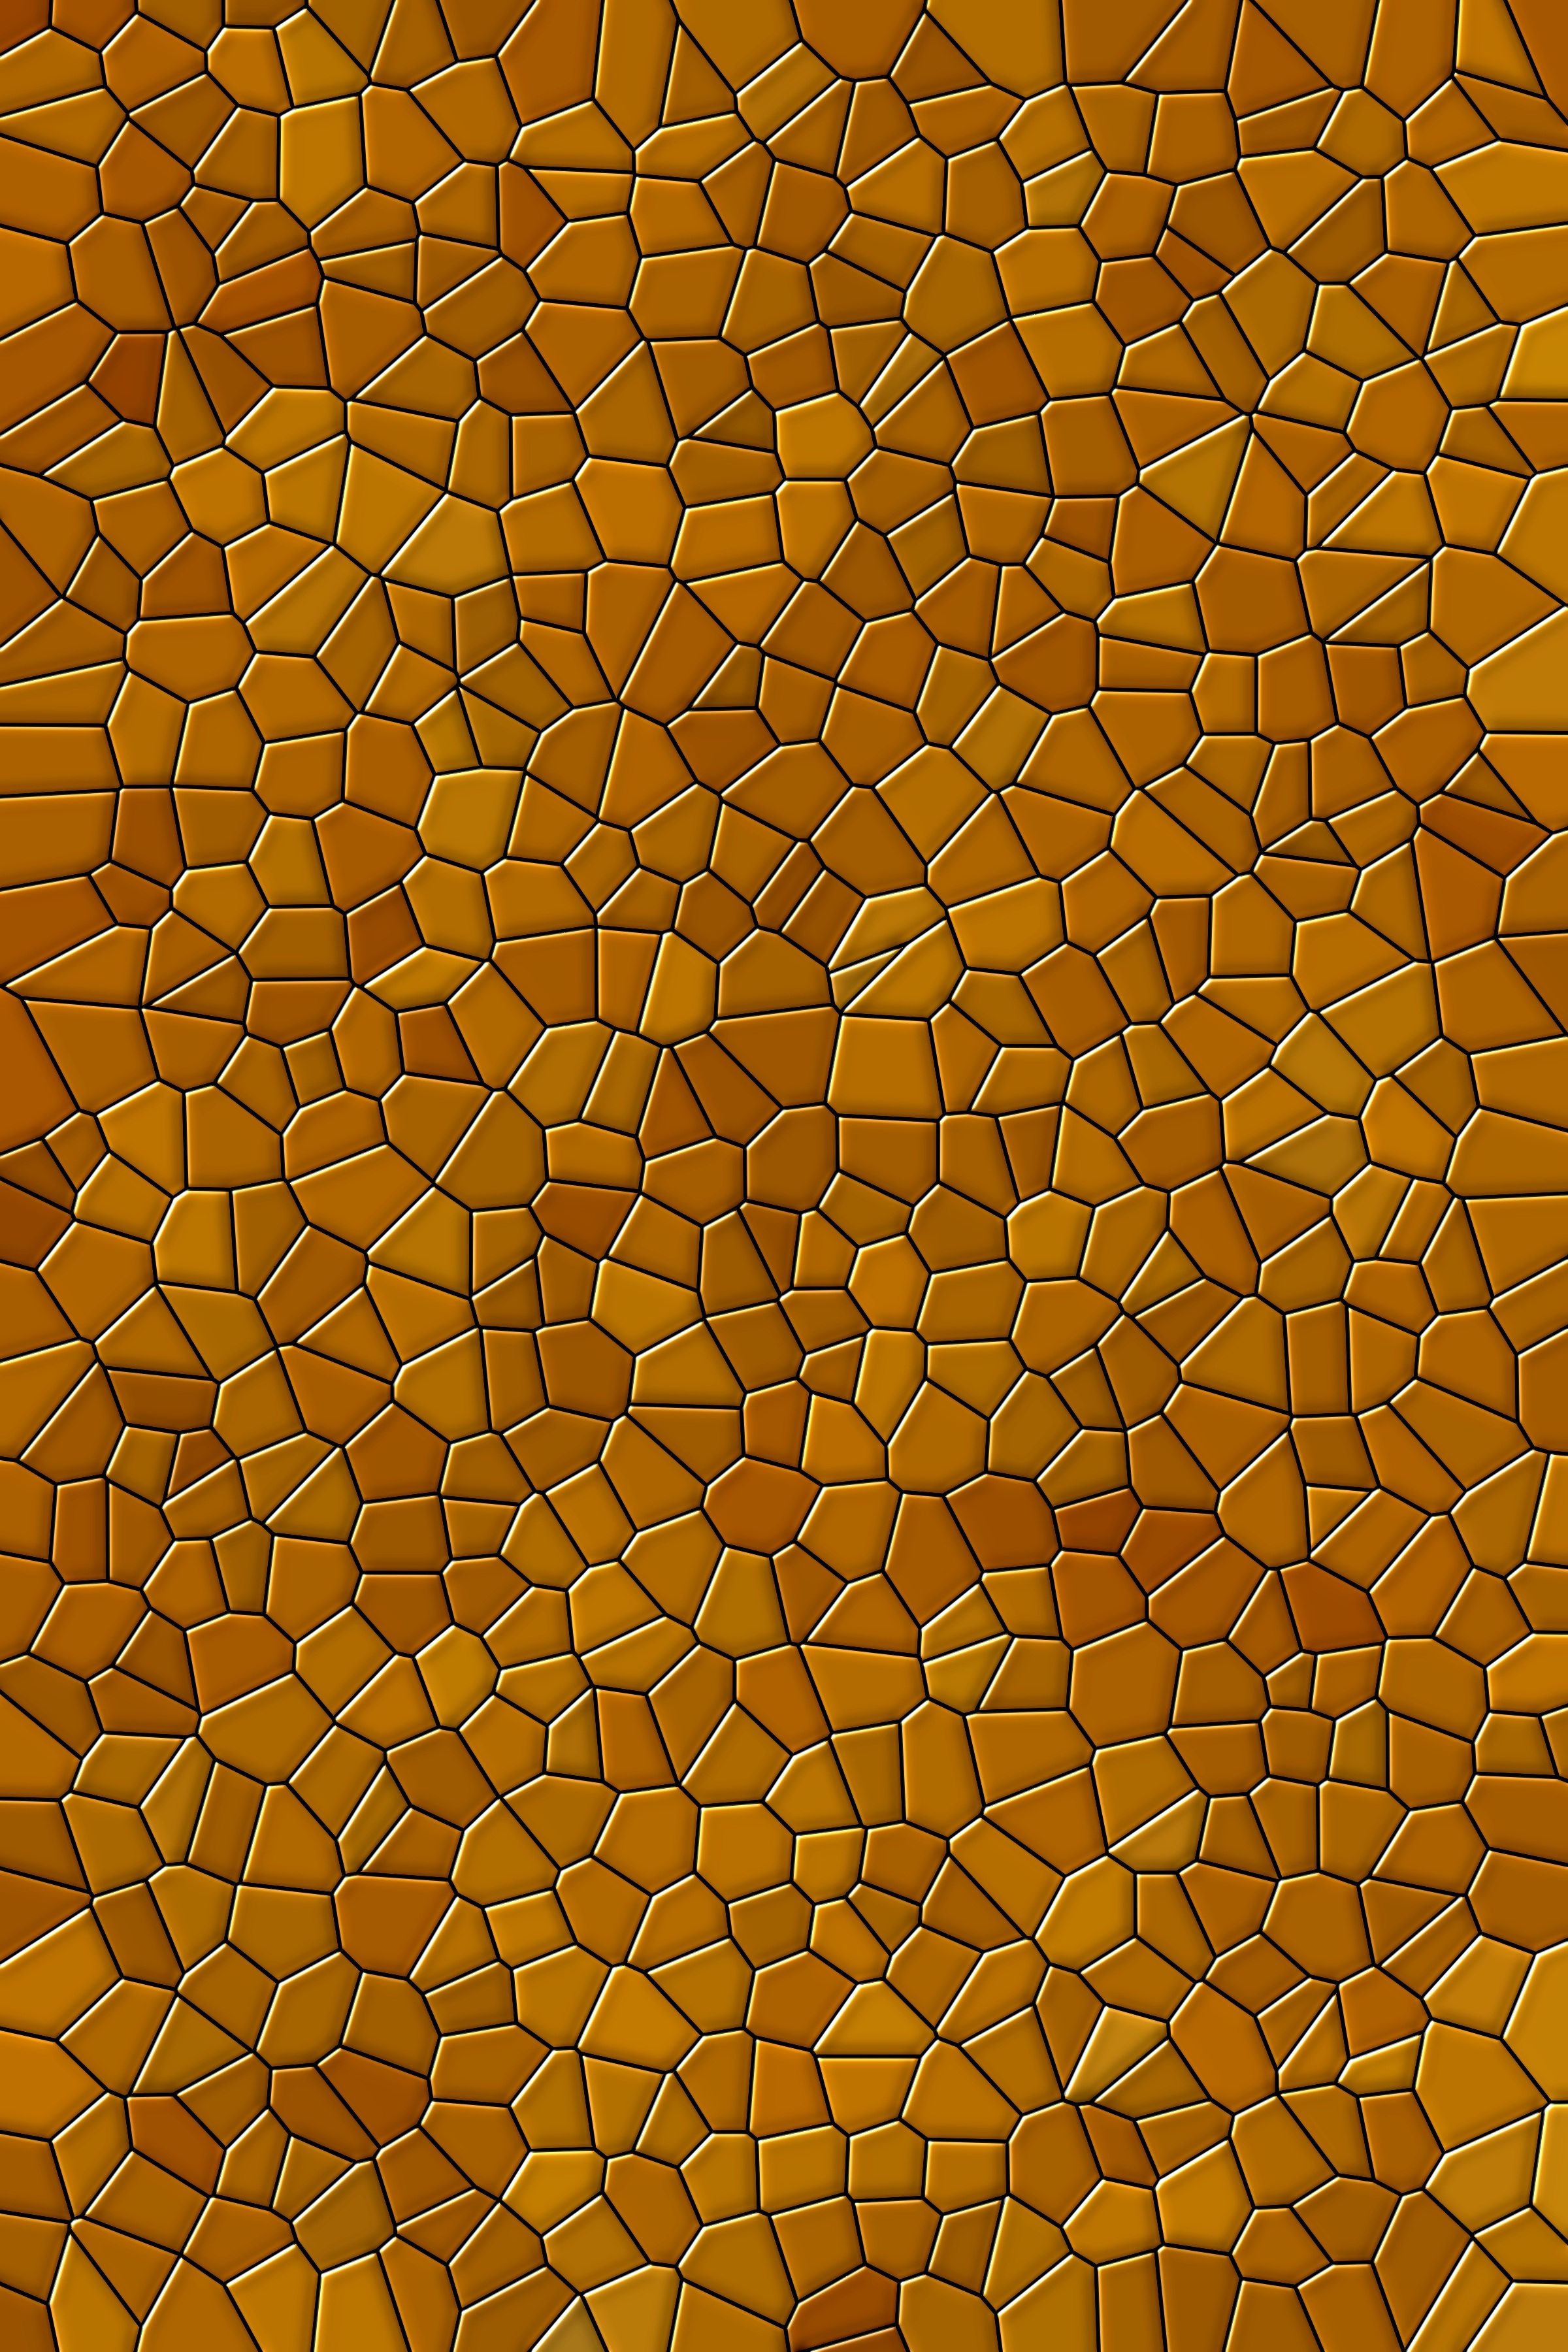 Wallpaper for mobile devices textures, shades, golden, pattern